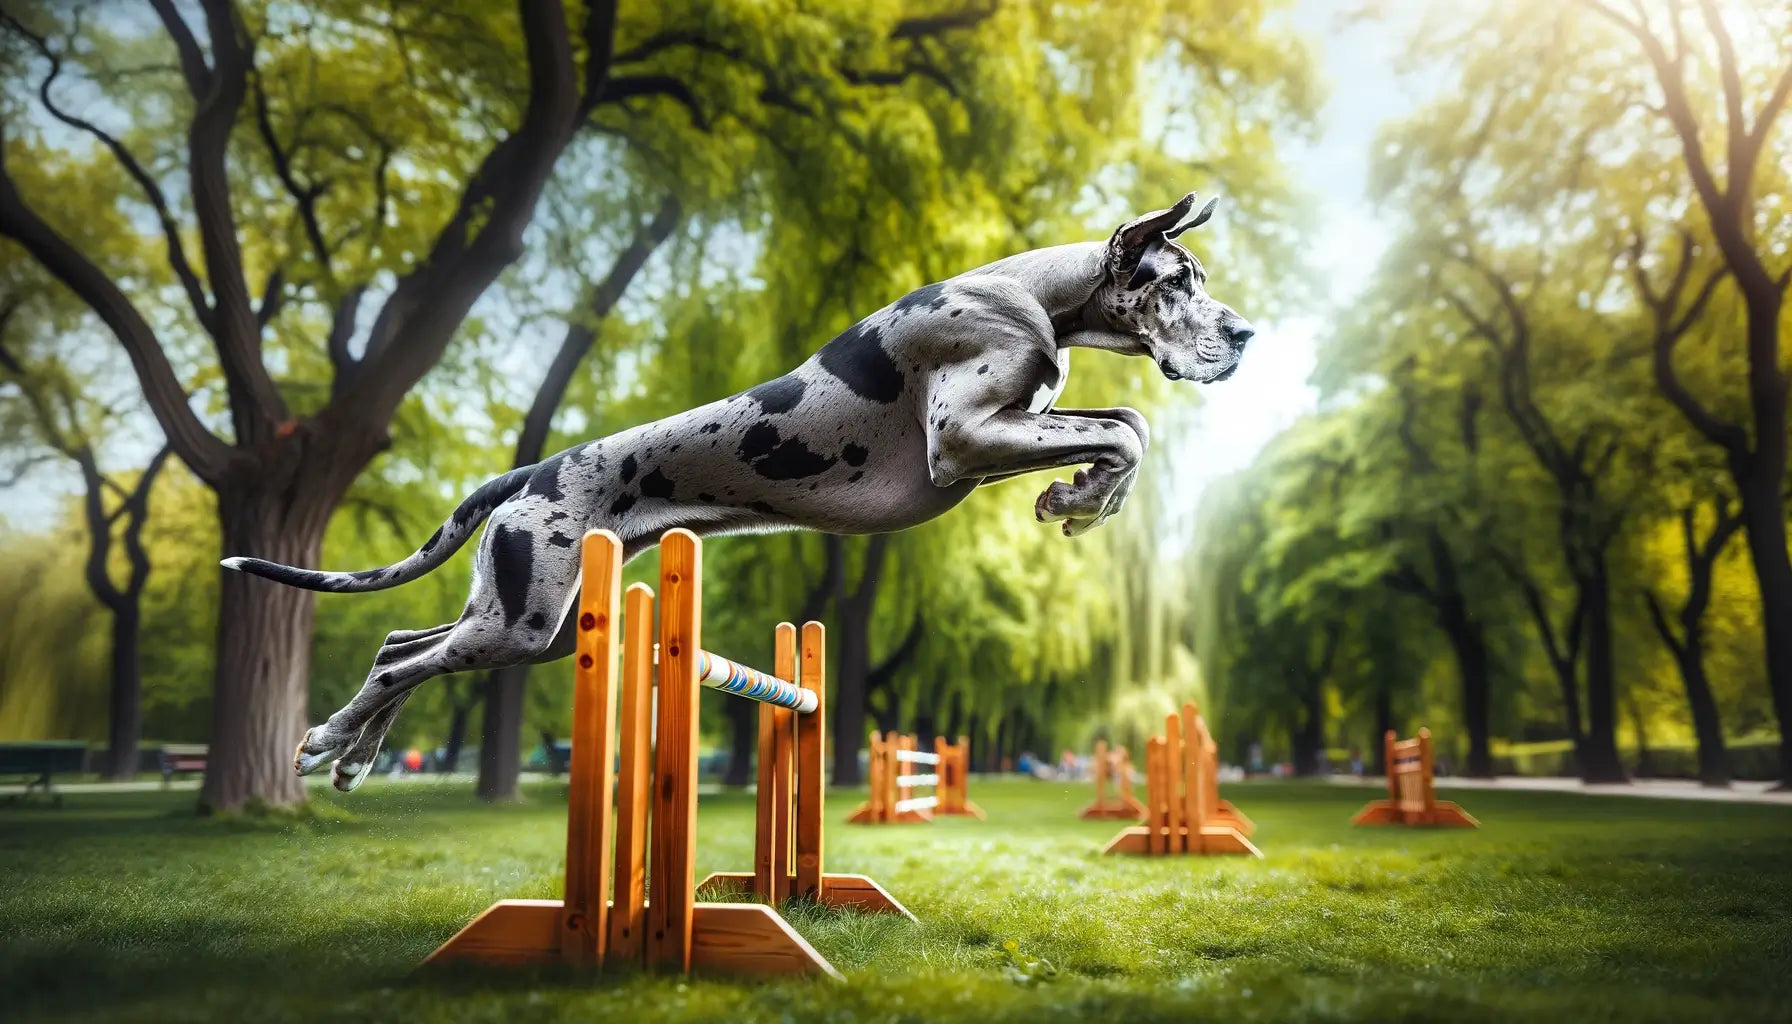 A Merle Great Dane leaping over a hurdle in a park, showcasing agility and strength.